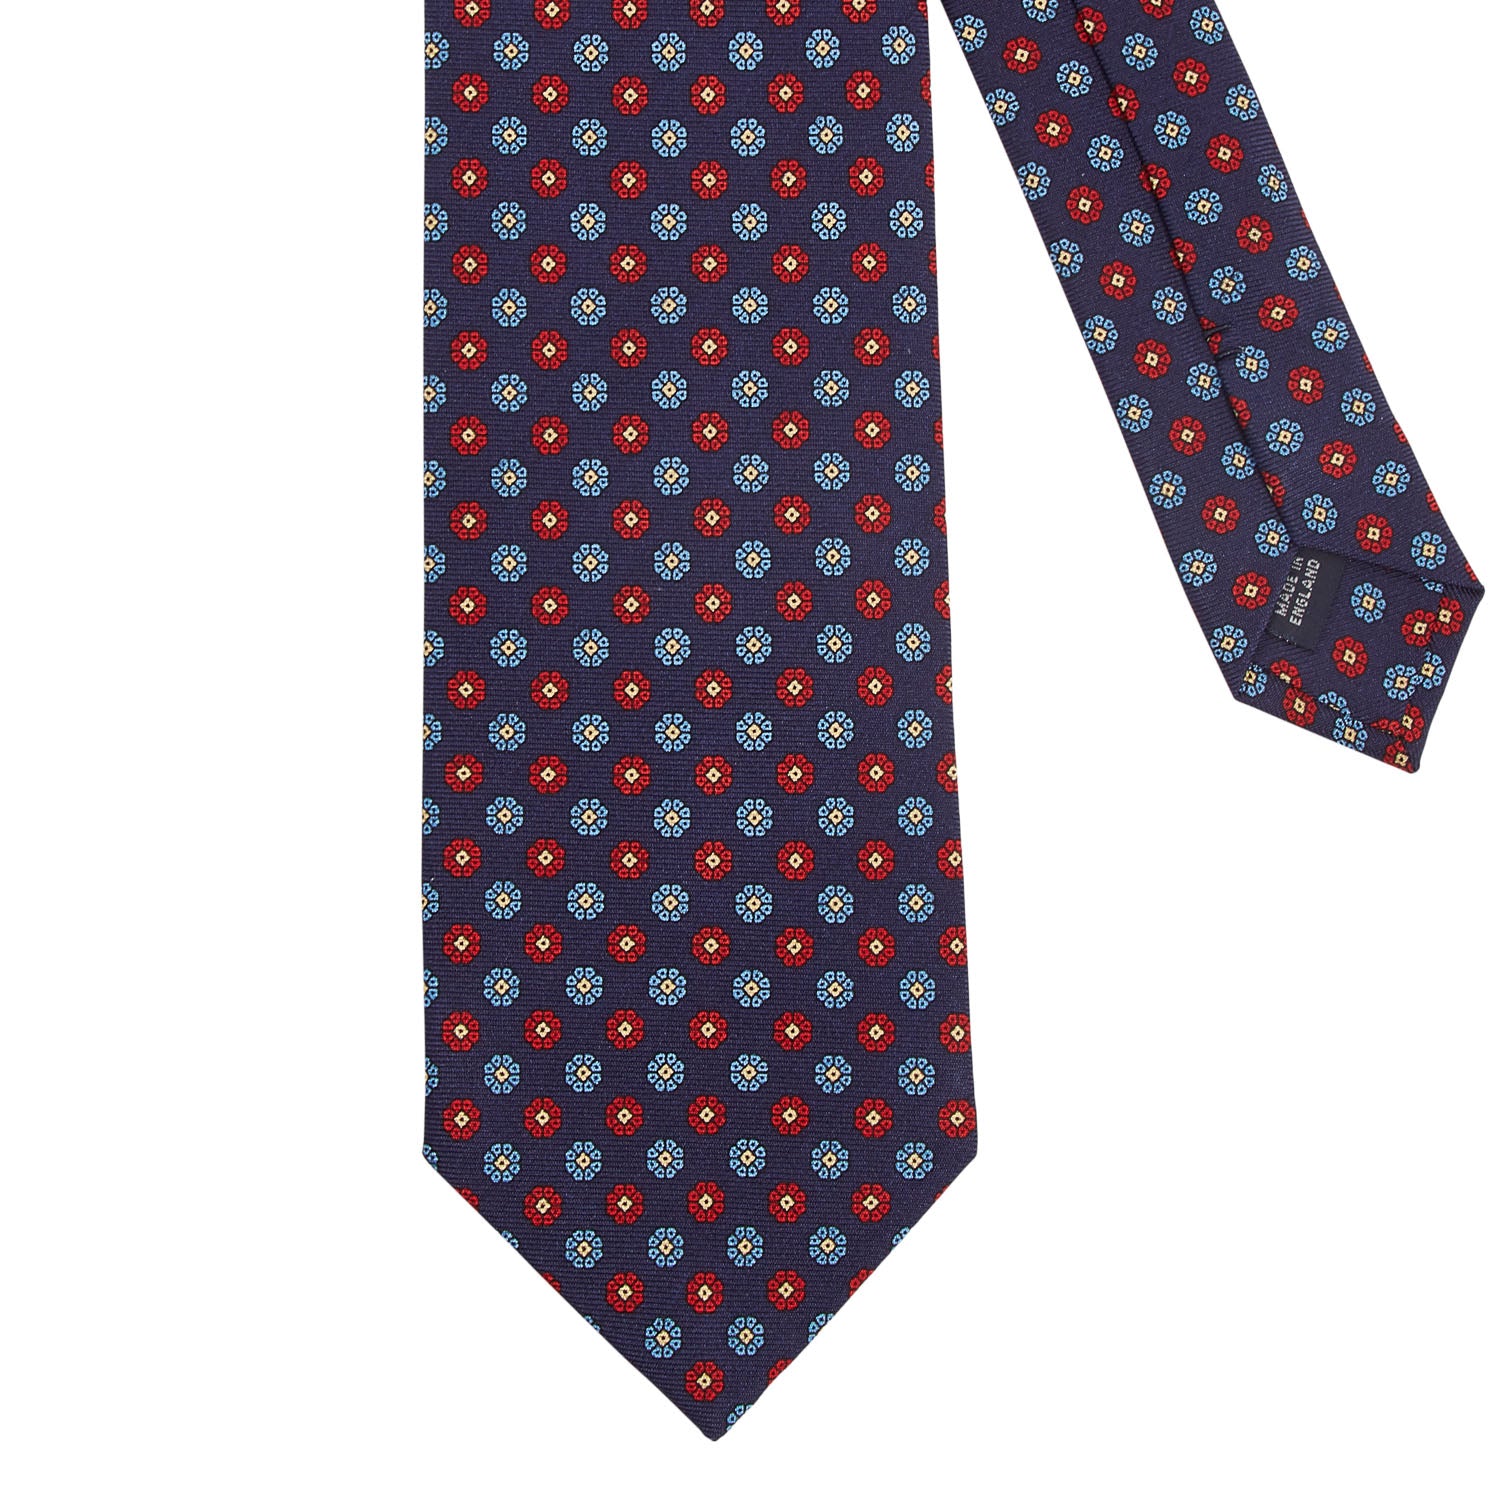 A high-quality, handmade Sovereign Grade Macclesfield Corn Floral Motif Tie from KirbyAllison.com with blue circles.